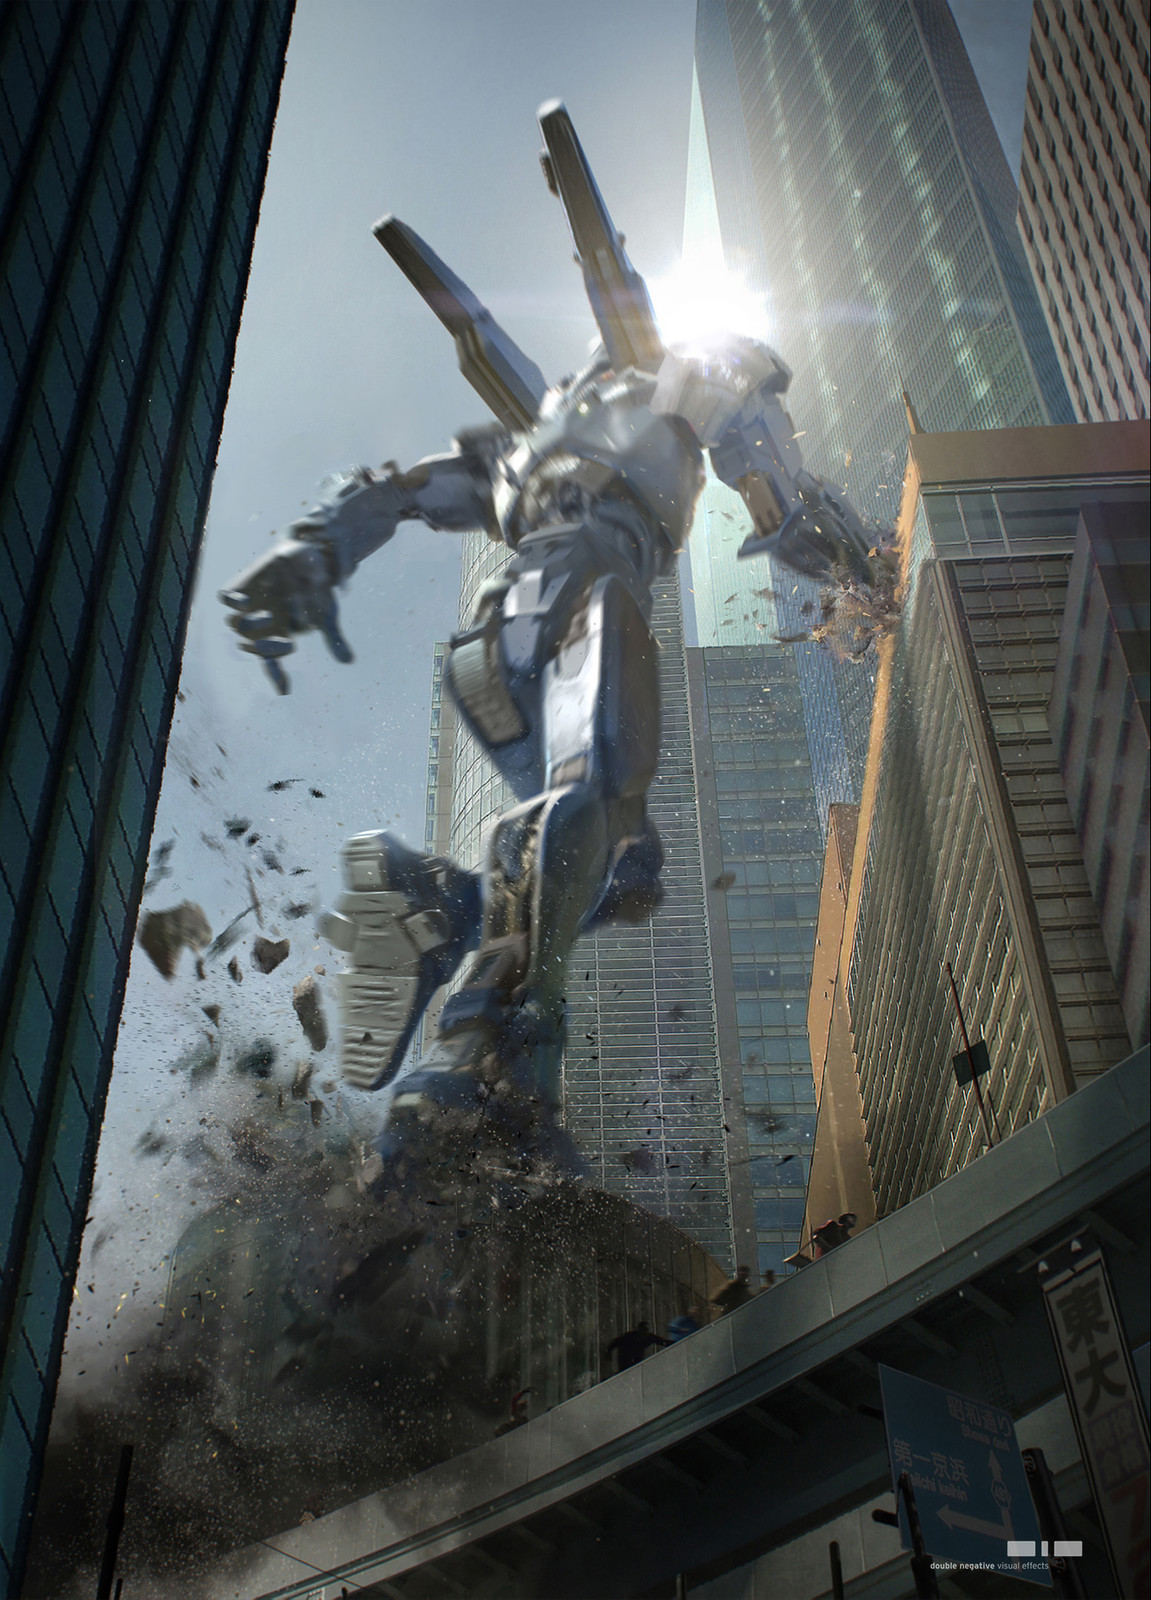 Gipsy Avenger, hopping from building to building in MegaTokyo, during a Kaiju attack.